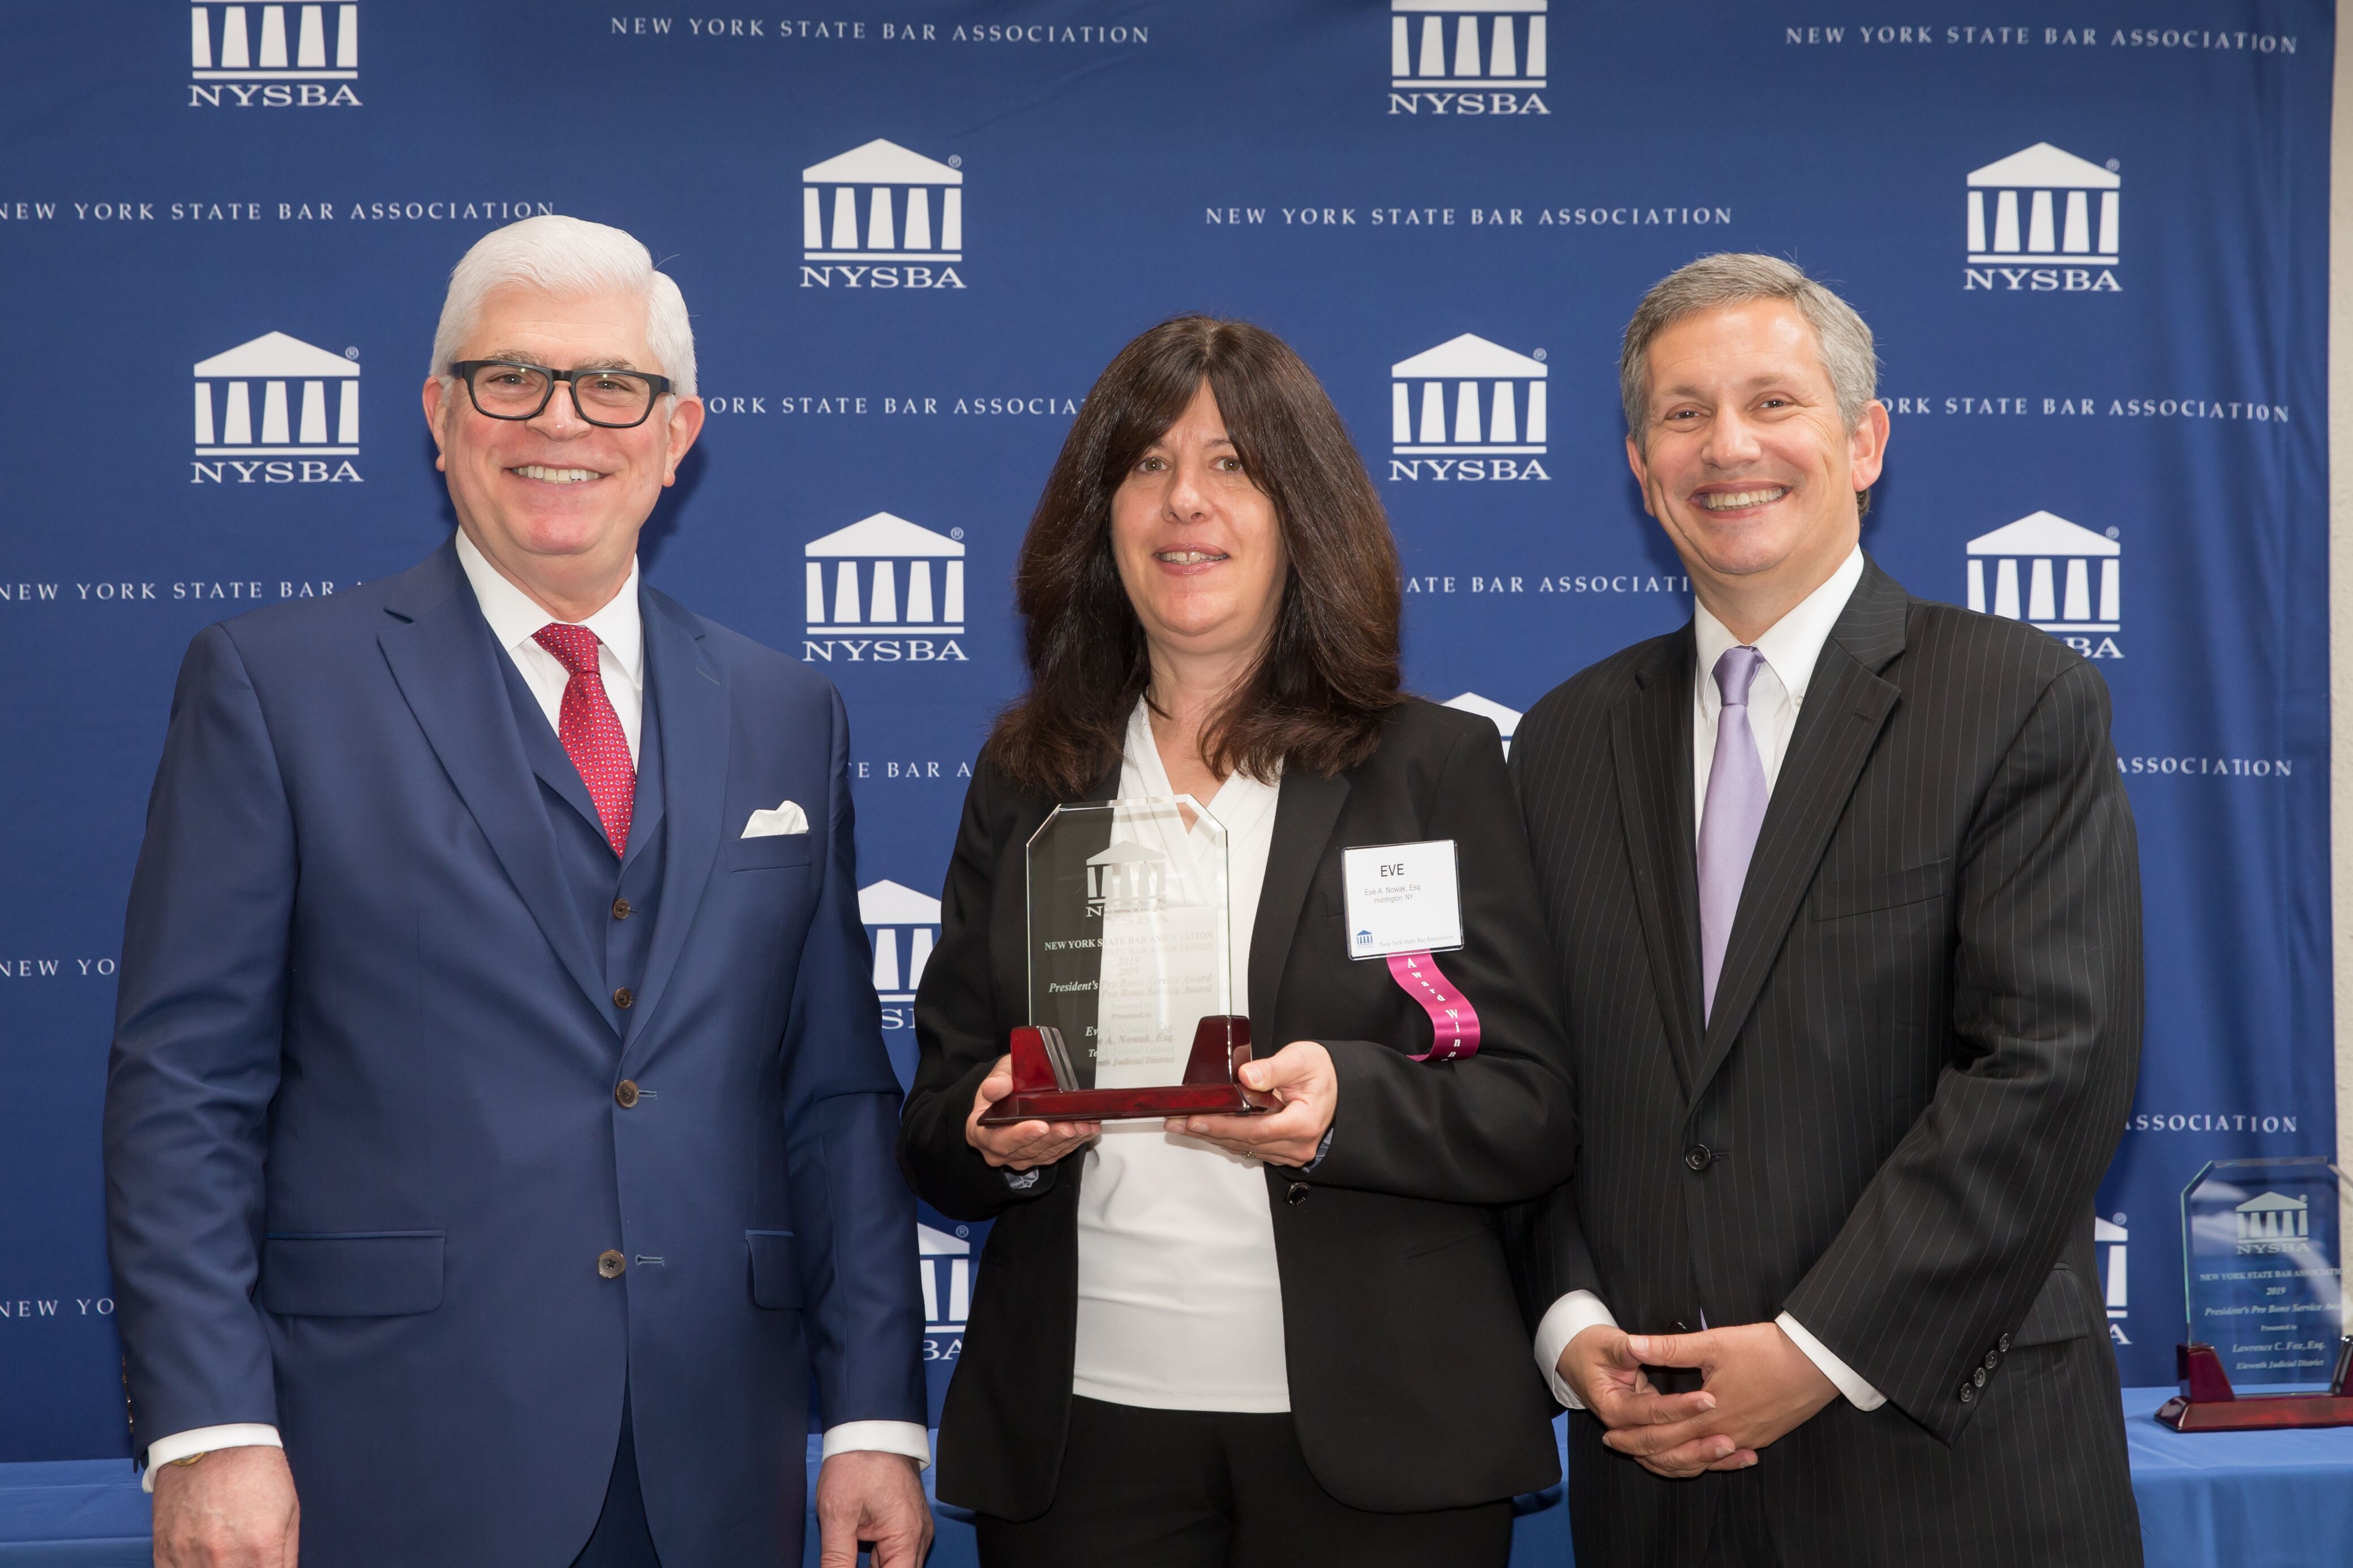 May 2, 2019: A Law Day Tradition, State Bar Association Honors Lawyers, Firms Throughout New York State for Pro Bono Service